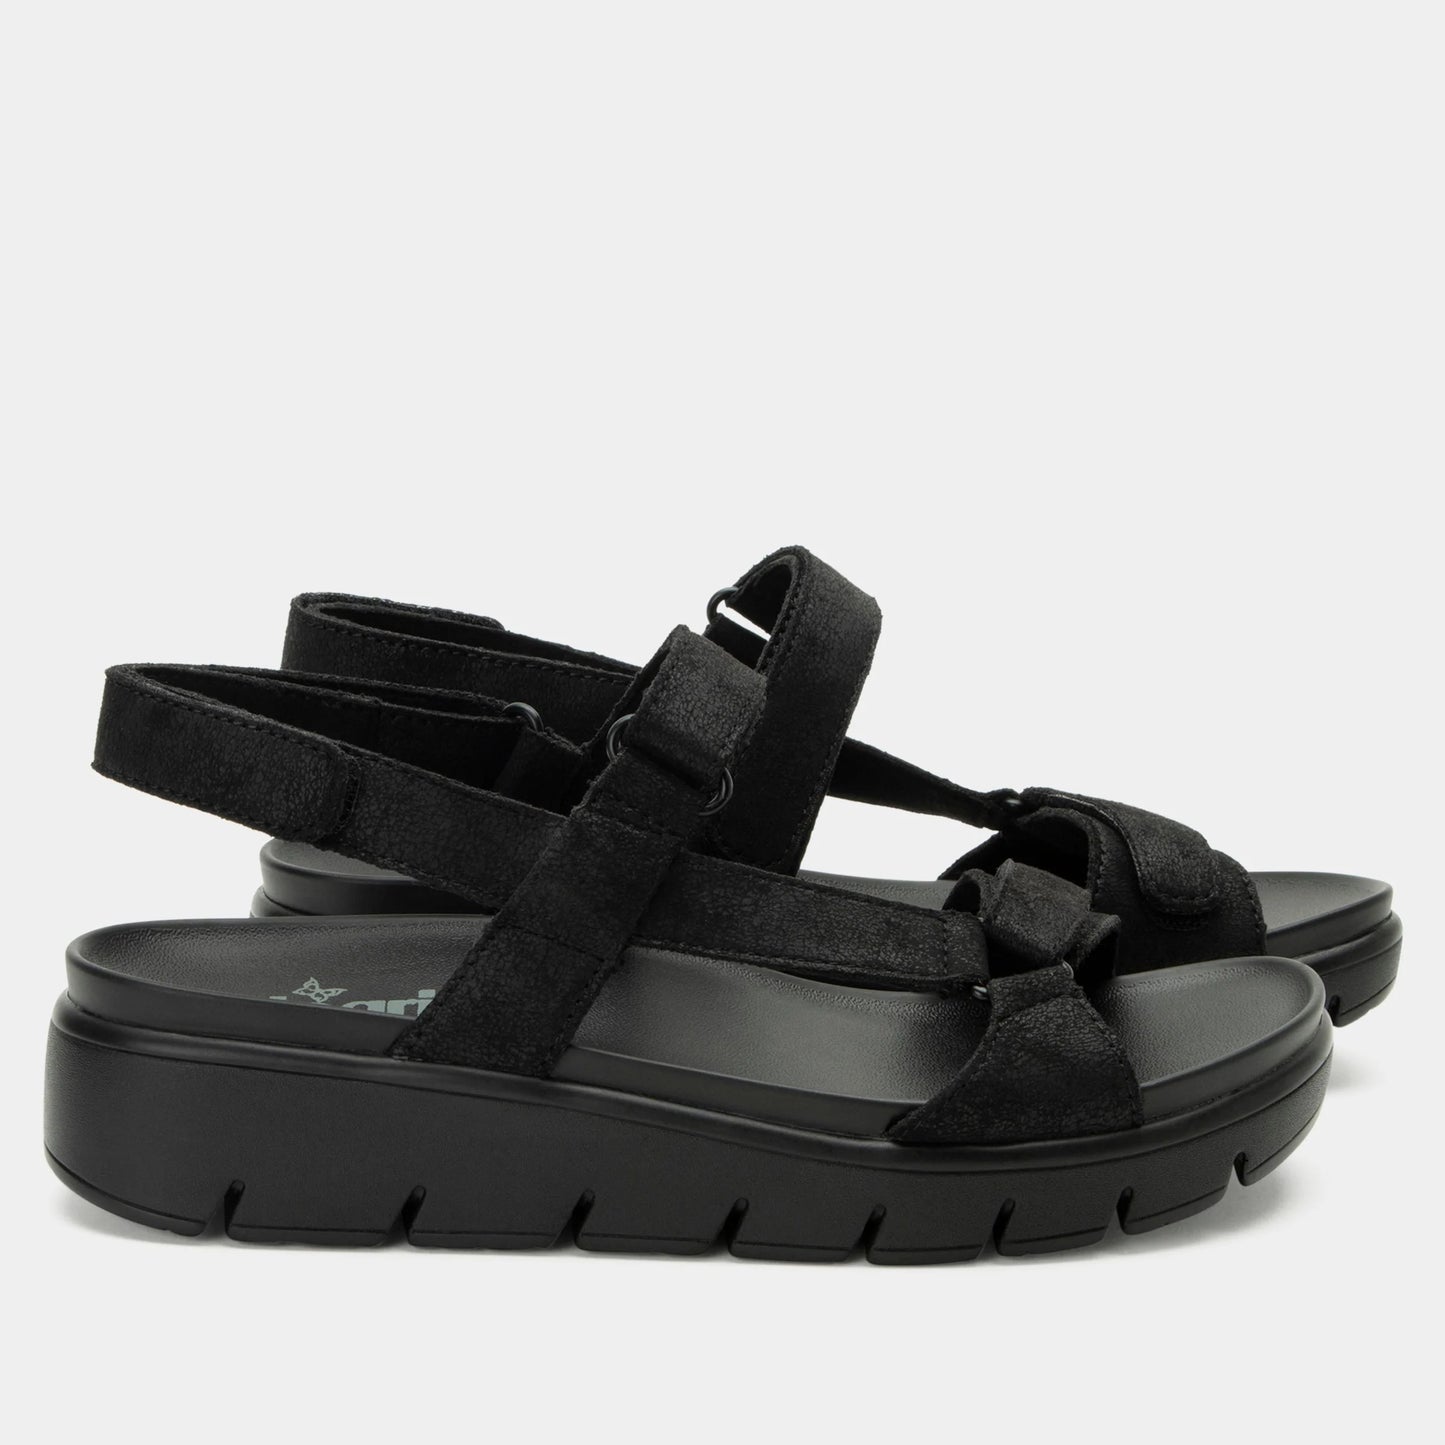 Women's Henna They Call Me Mellow Sandals - Black